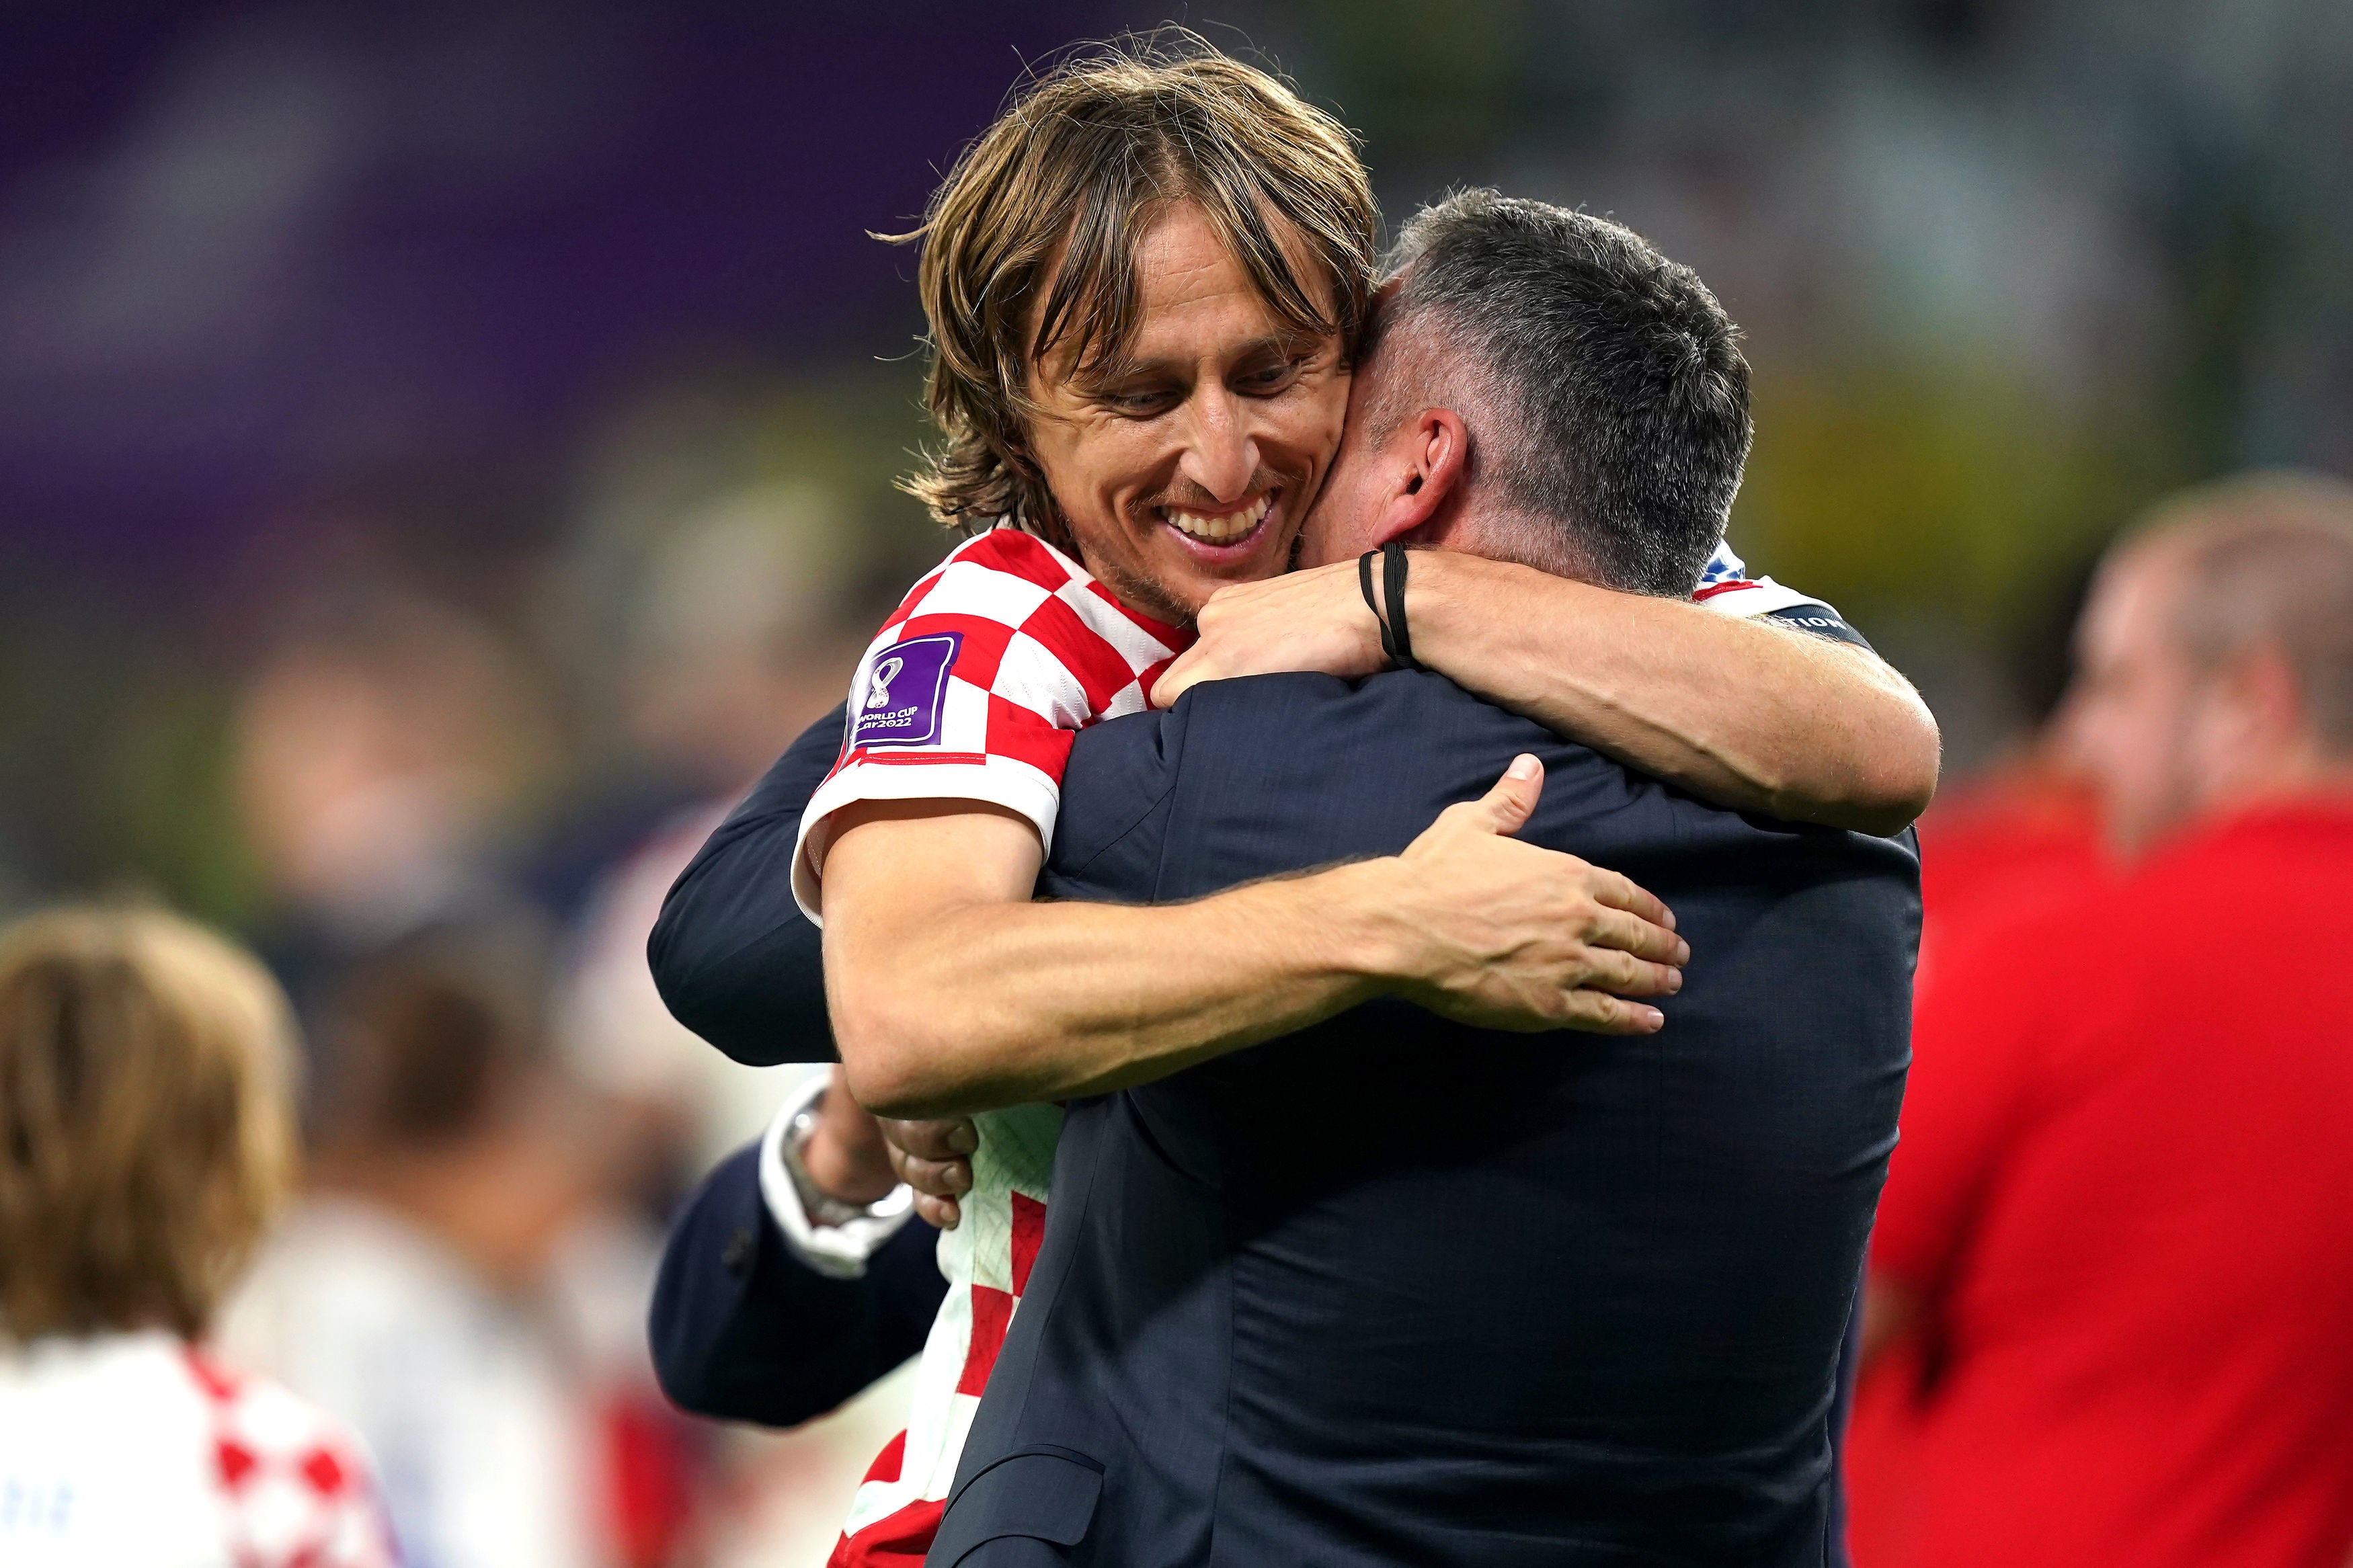 Luka Modric is hugged after the full-time whistle